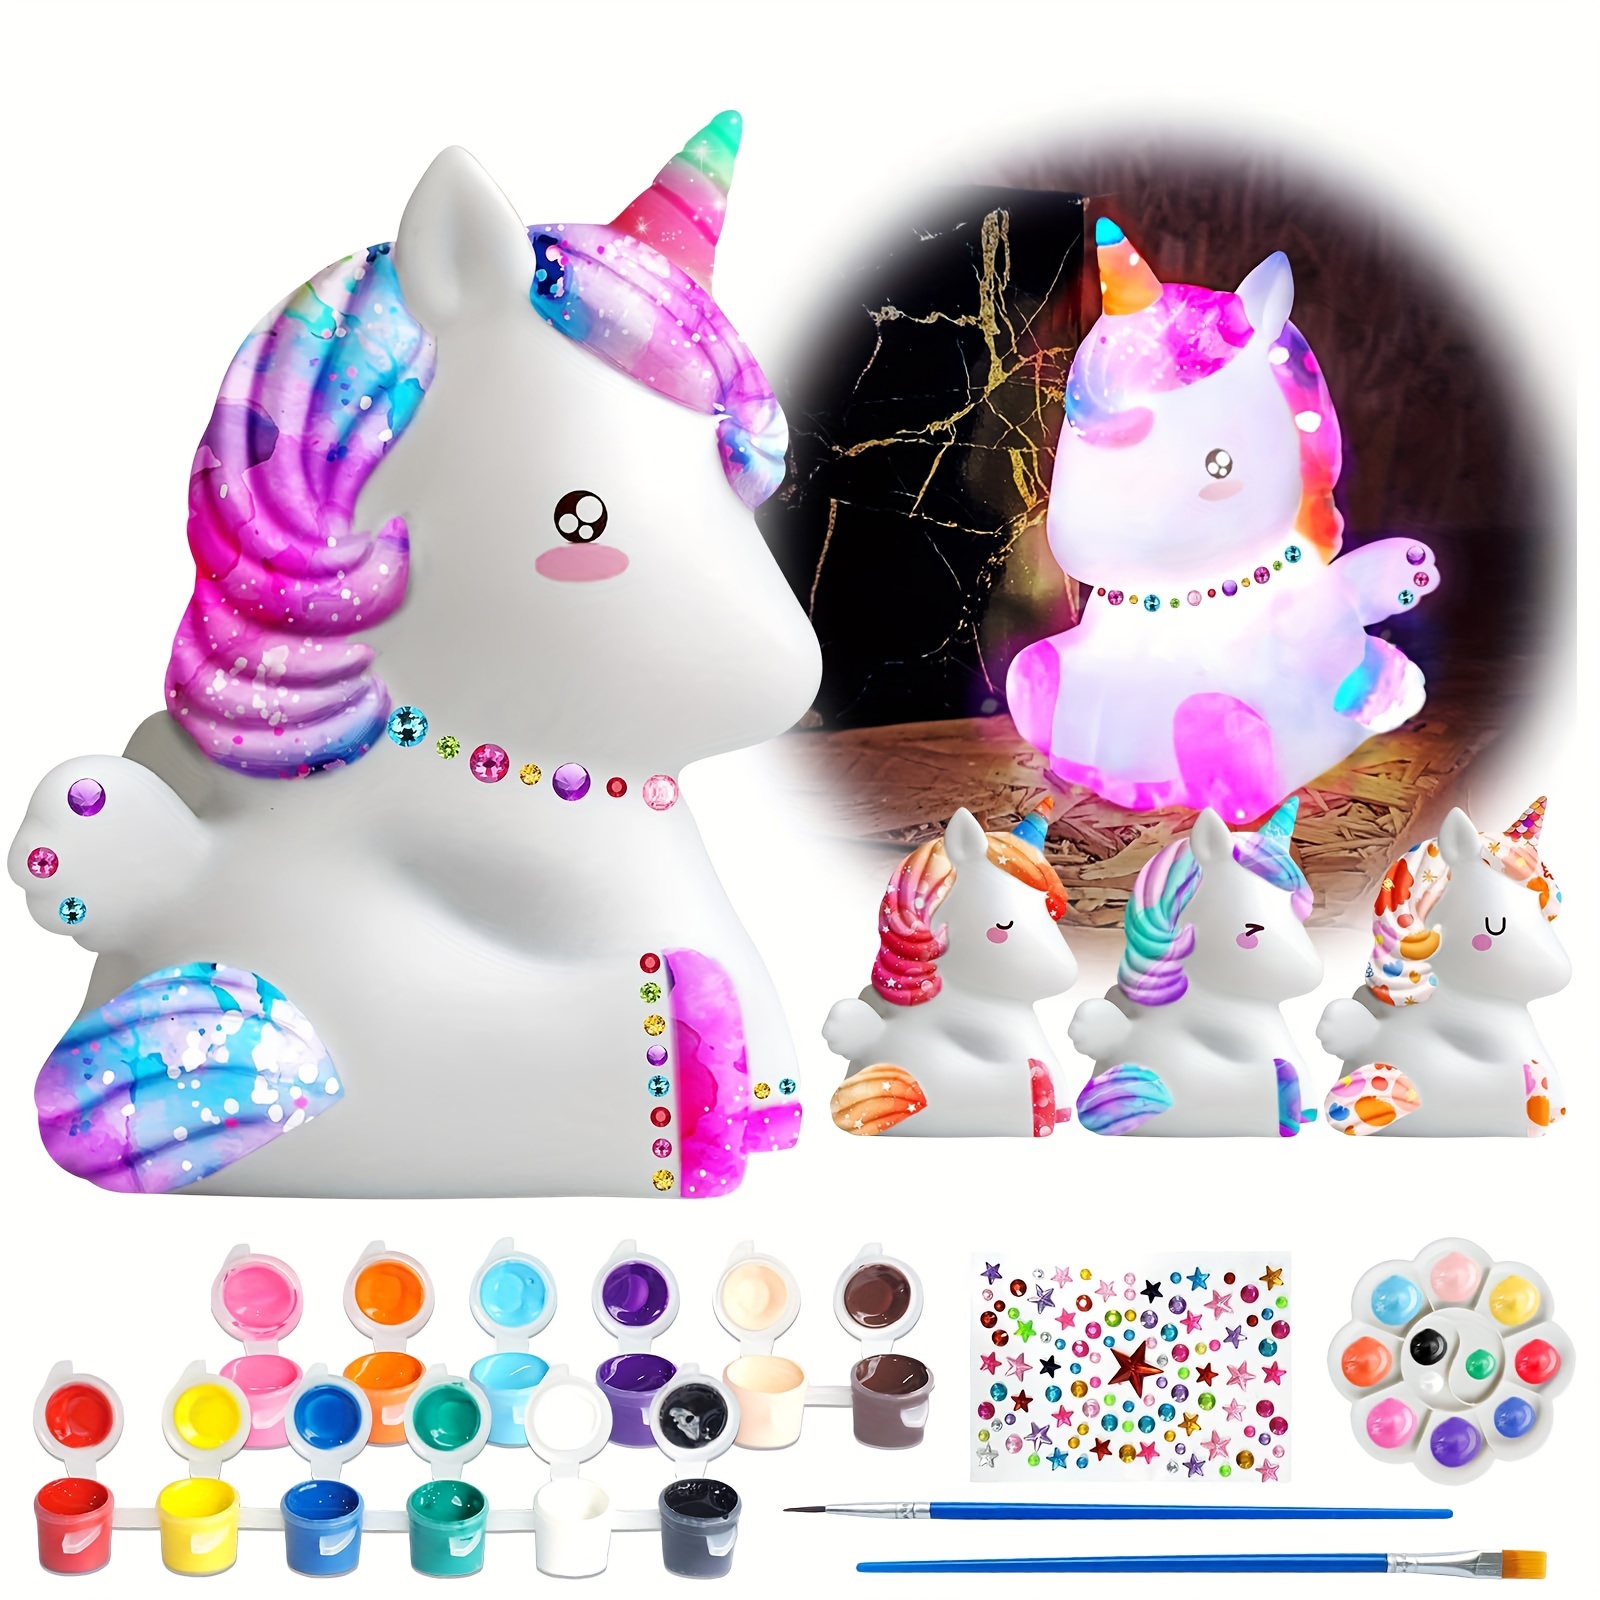 DIY Kids Arts Crafts Set,Unicorn Toy for Girls, Unicorn Painting Kit - 7  Unicorn Figurines, Creativity Arts and Crafts for Kids Ages 4-8 Easter  Unicorn Toys for 4, 5, 6, 7, 8